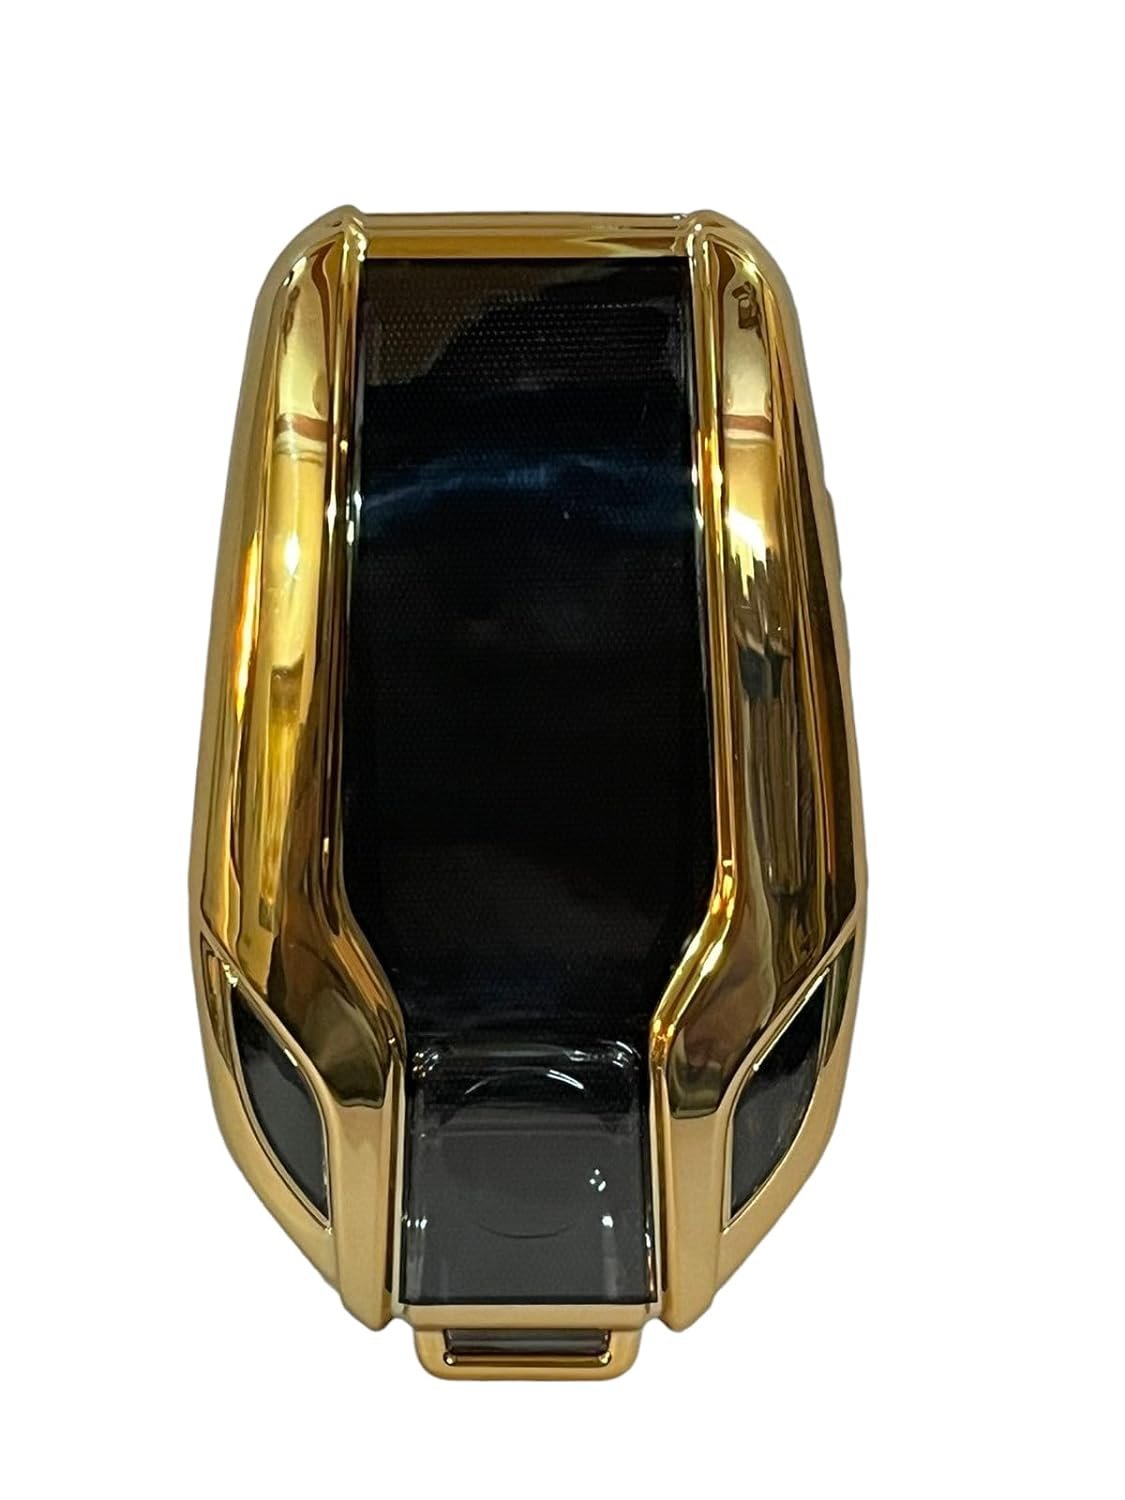 TPU Car Key Cover Compatibility with X Series Display Key (Black/Gold) Image 